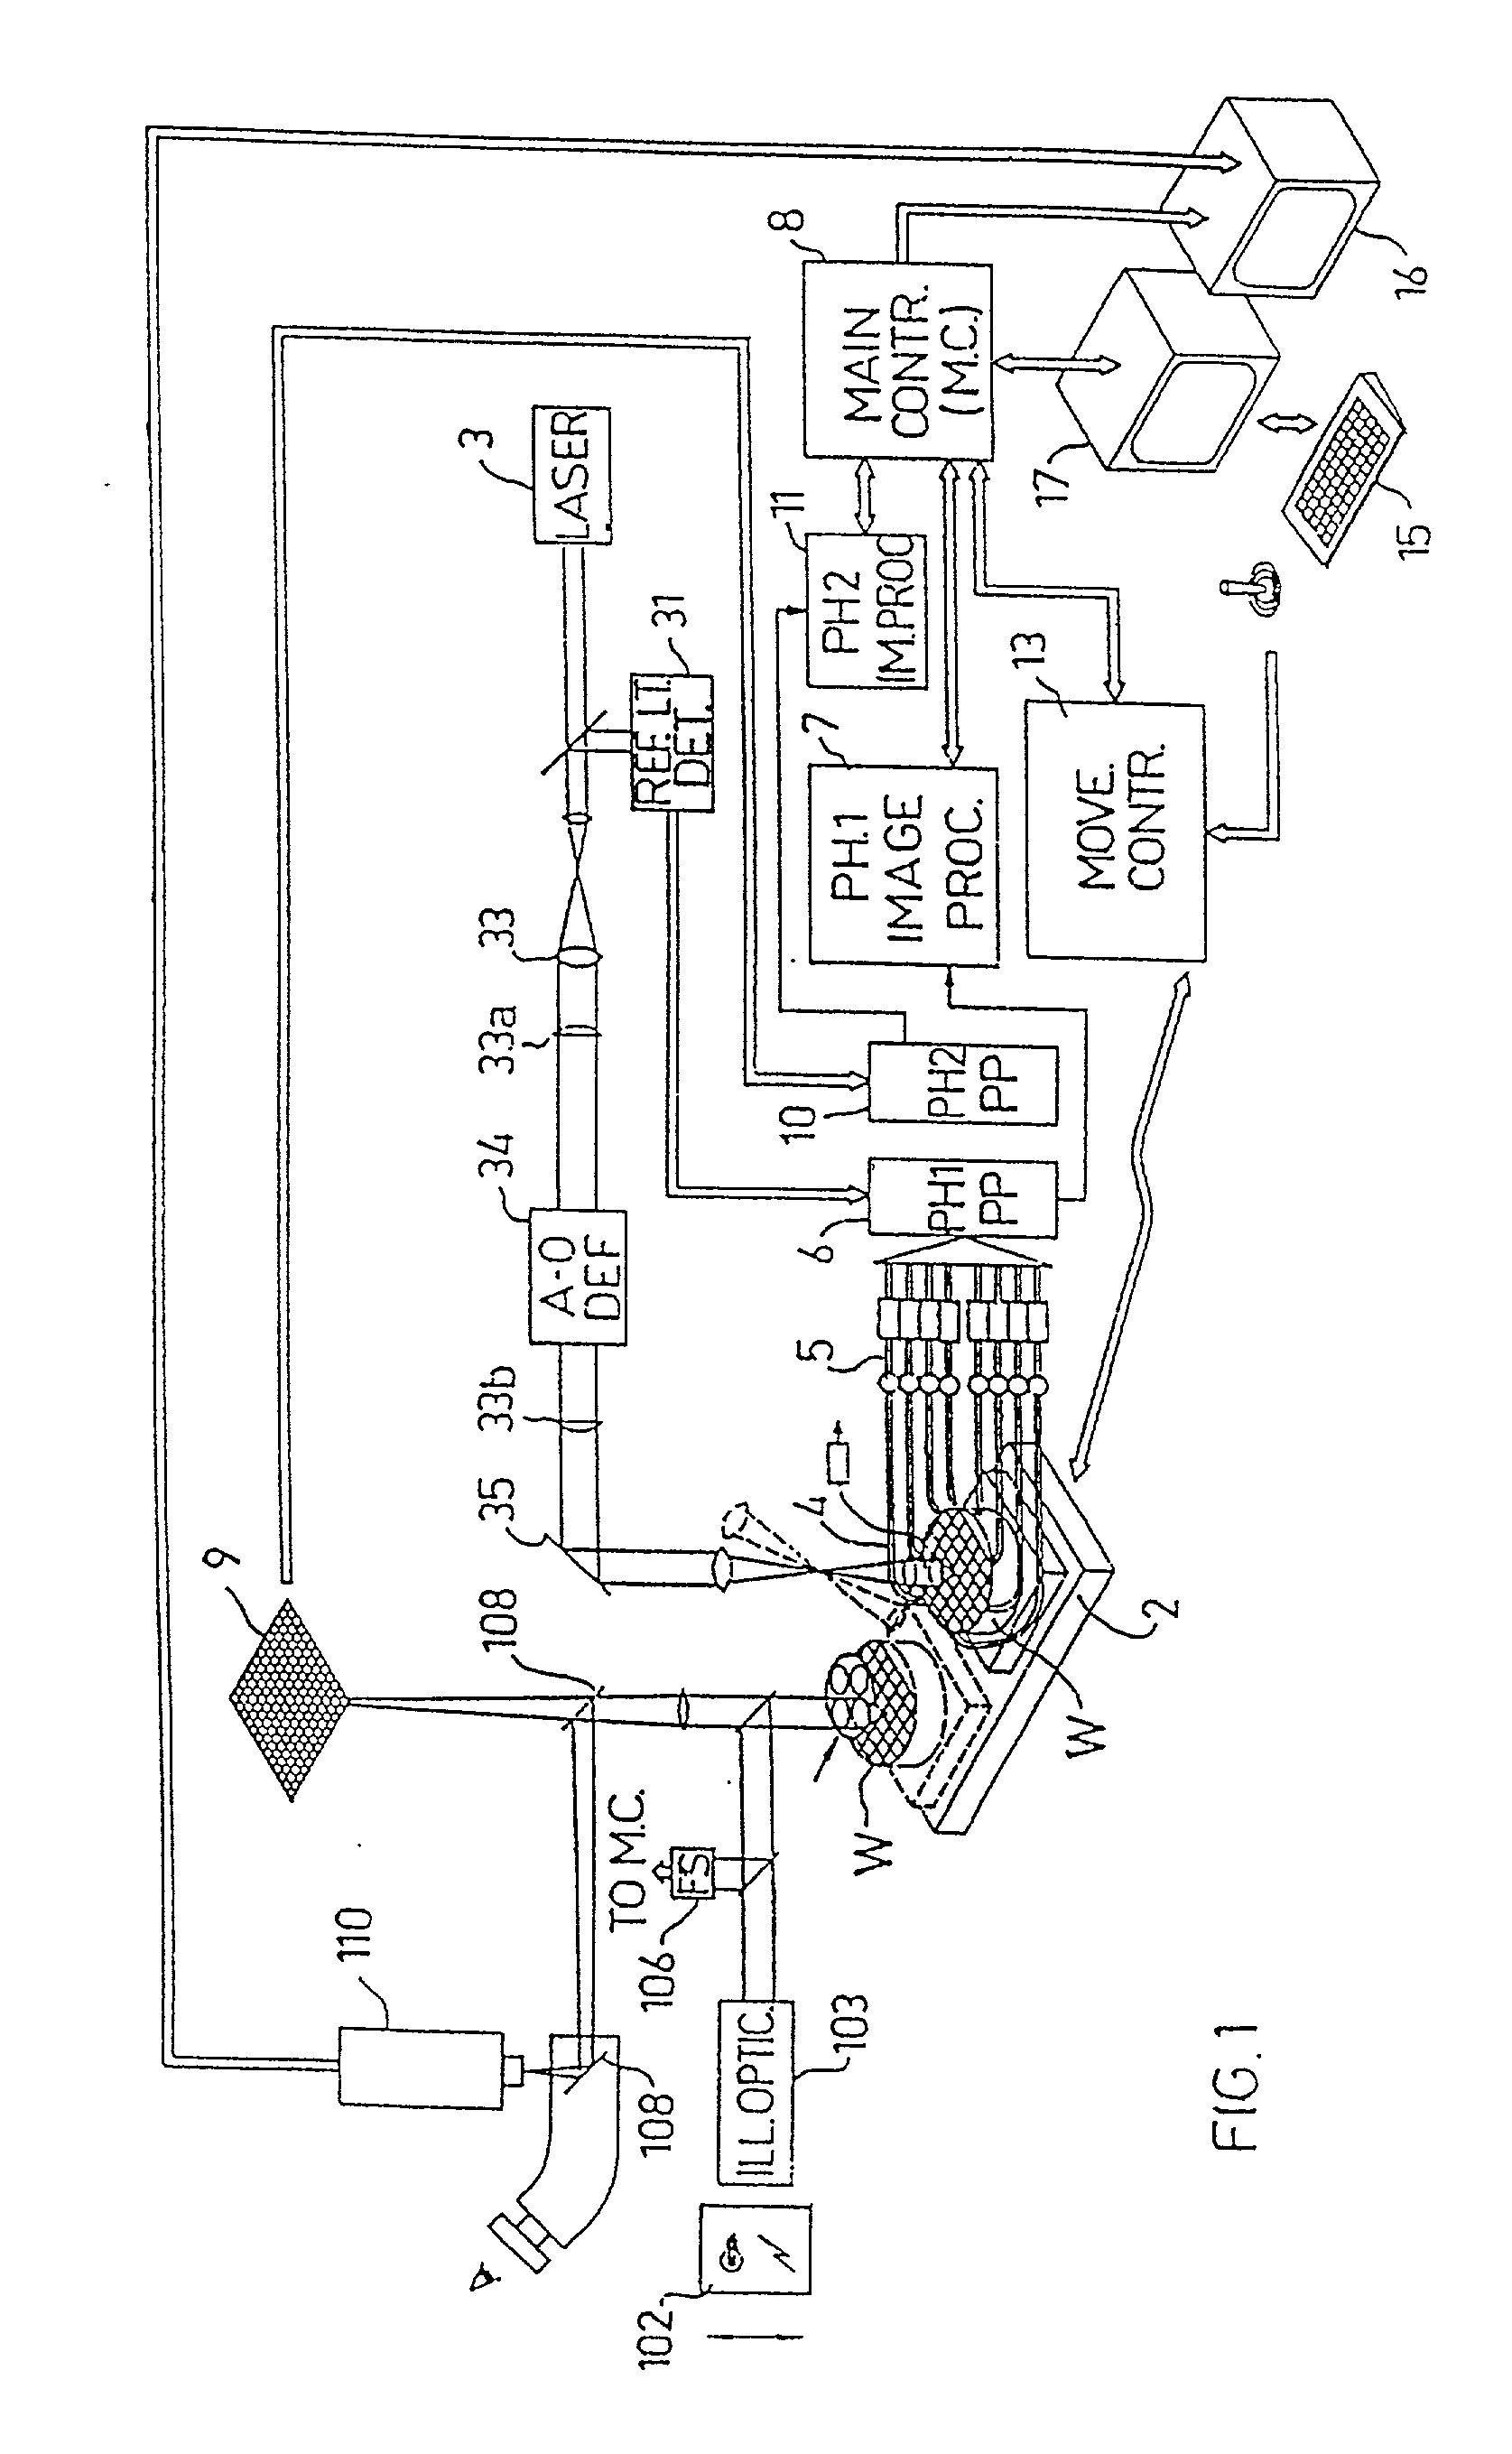 Optical inspection apparatus for defect detection